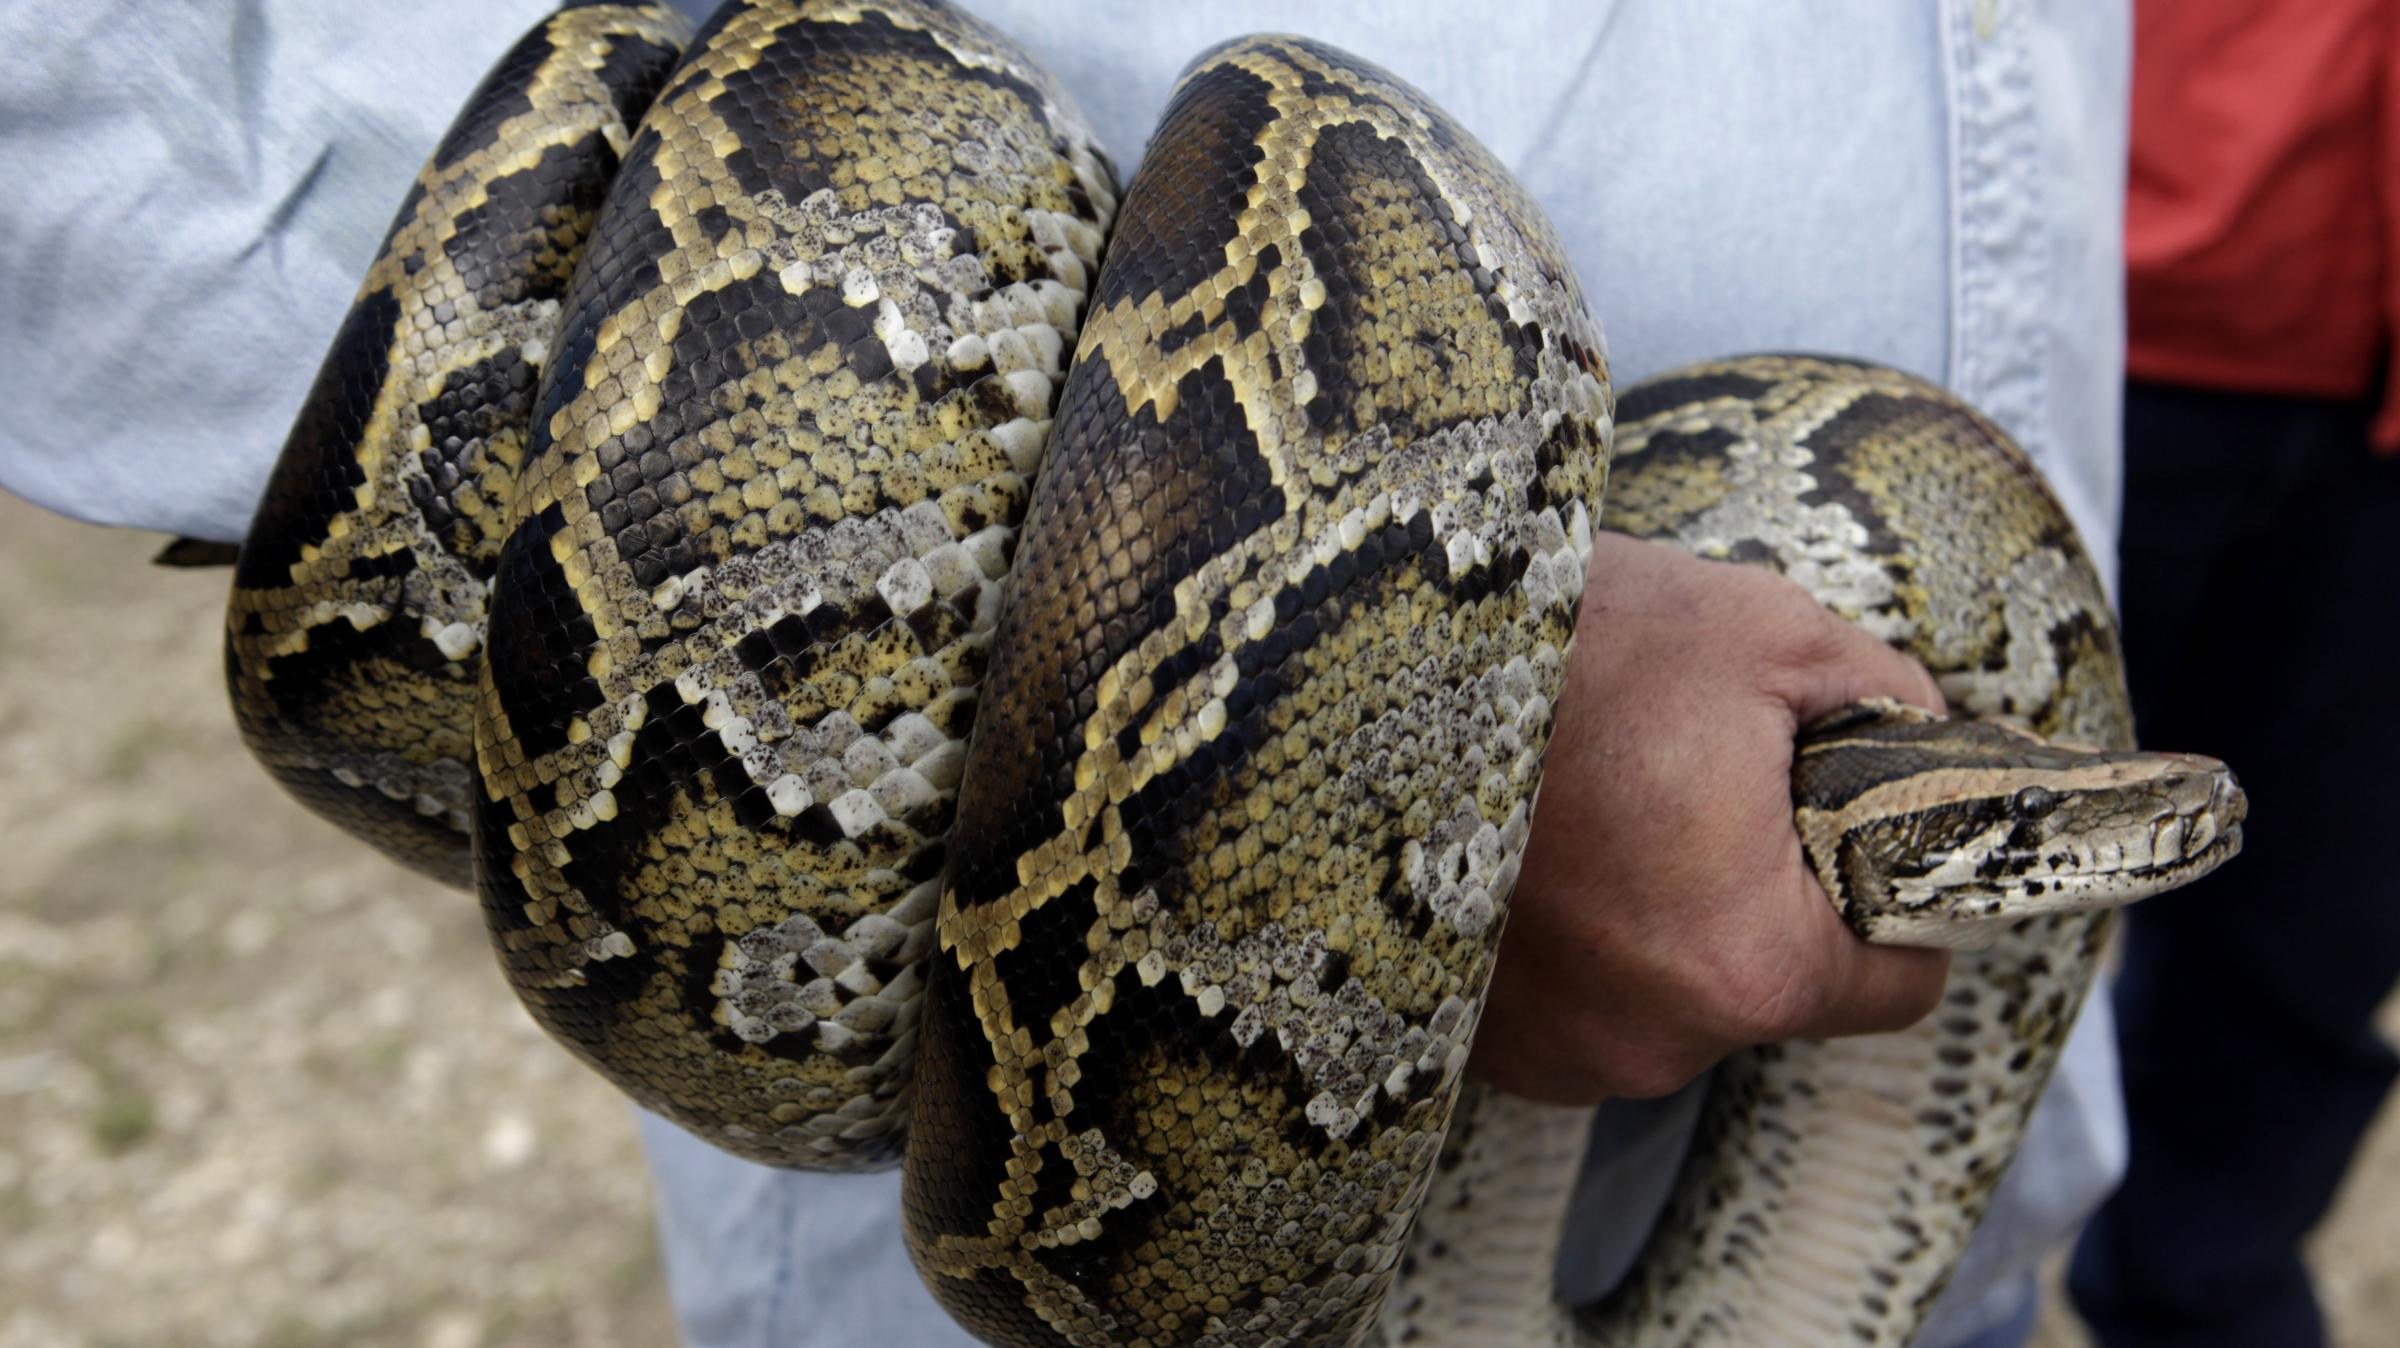 Will Florida Pythons Slither To Rest Of The U.S.? WBFO